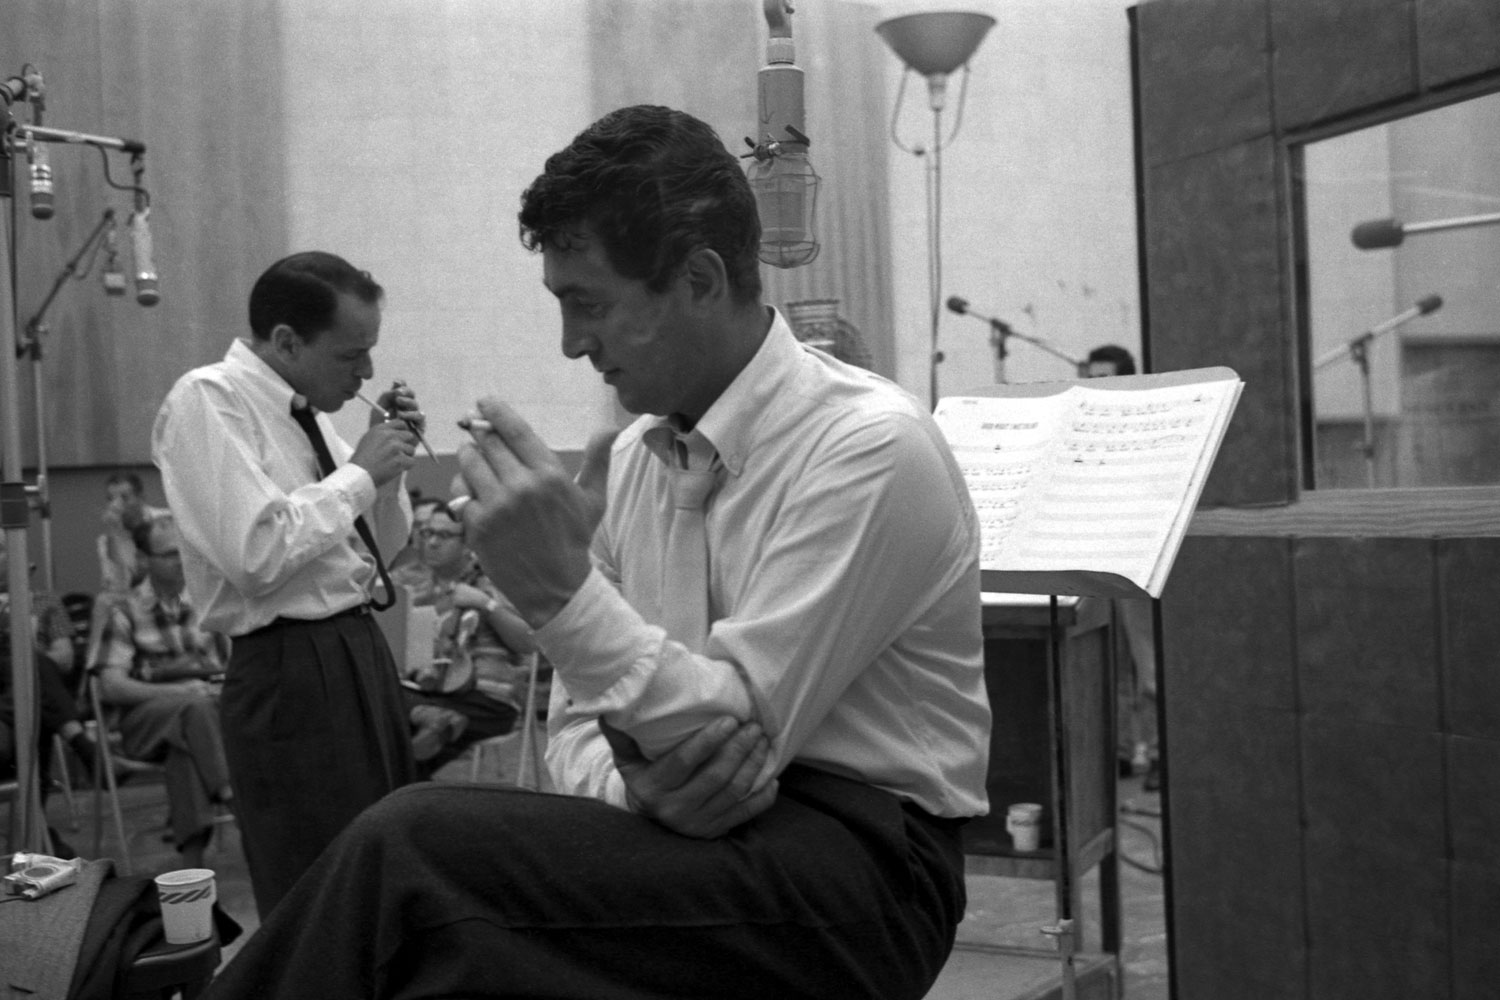 Frank Sinatra and Dean Martin take a cigarette break during the recording of Sleep Warm in 1958.